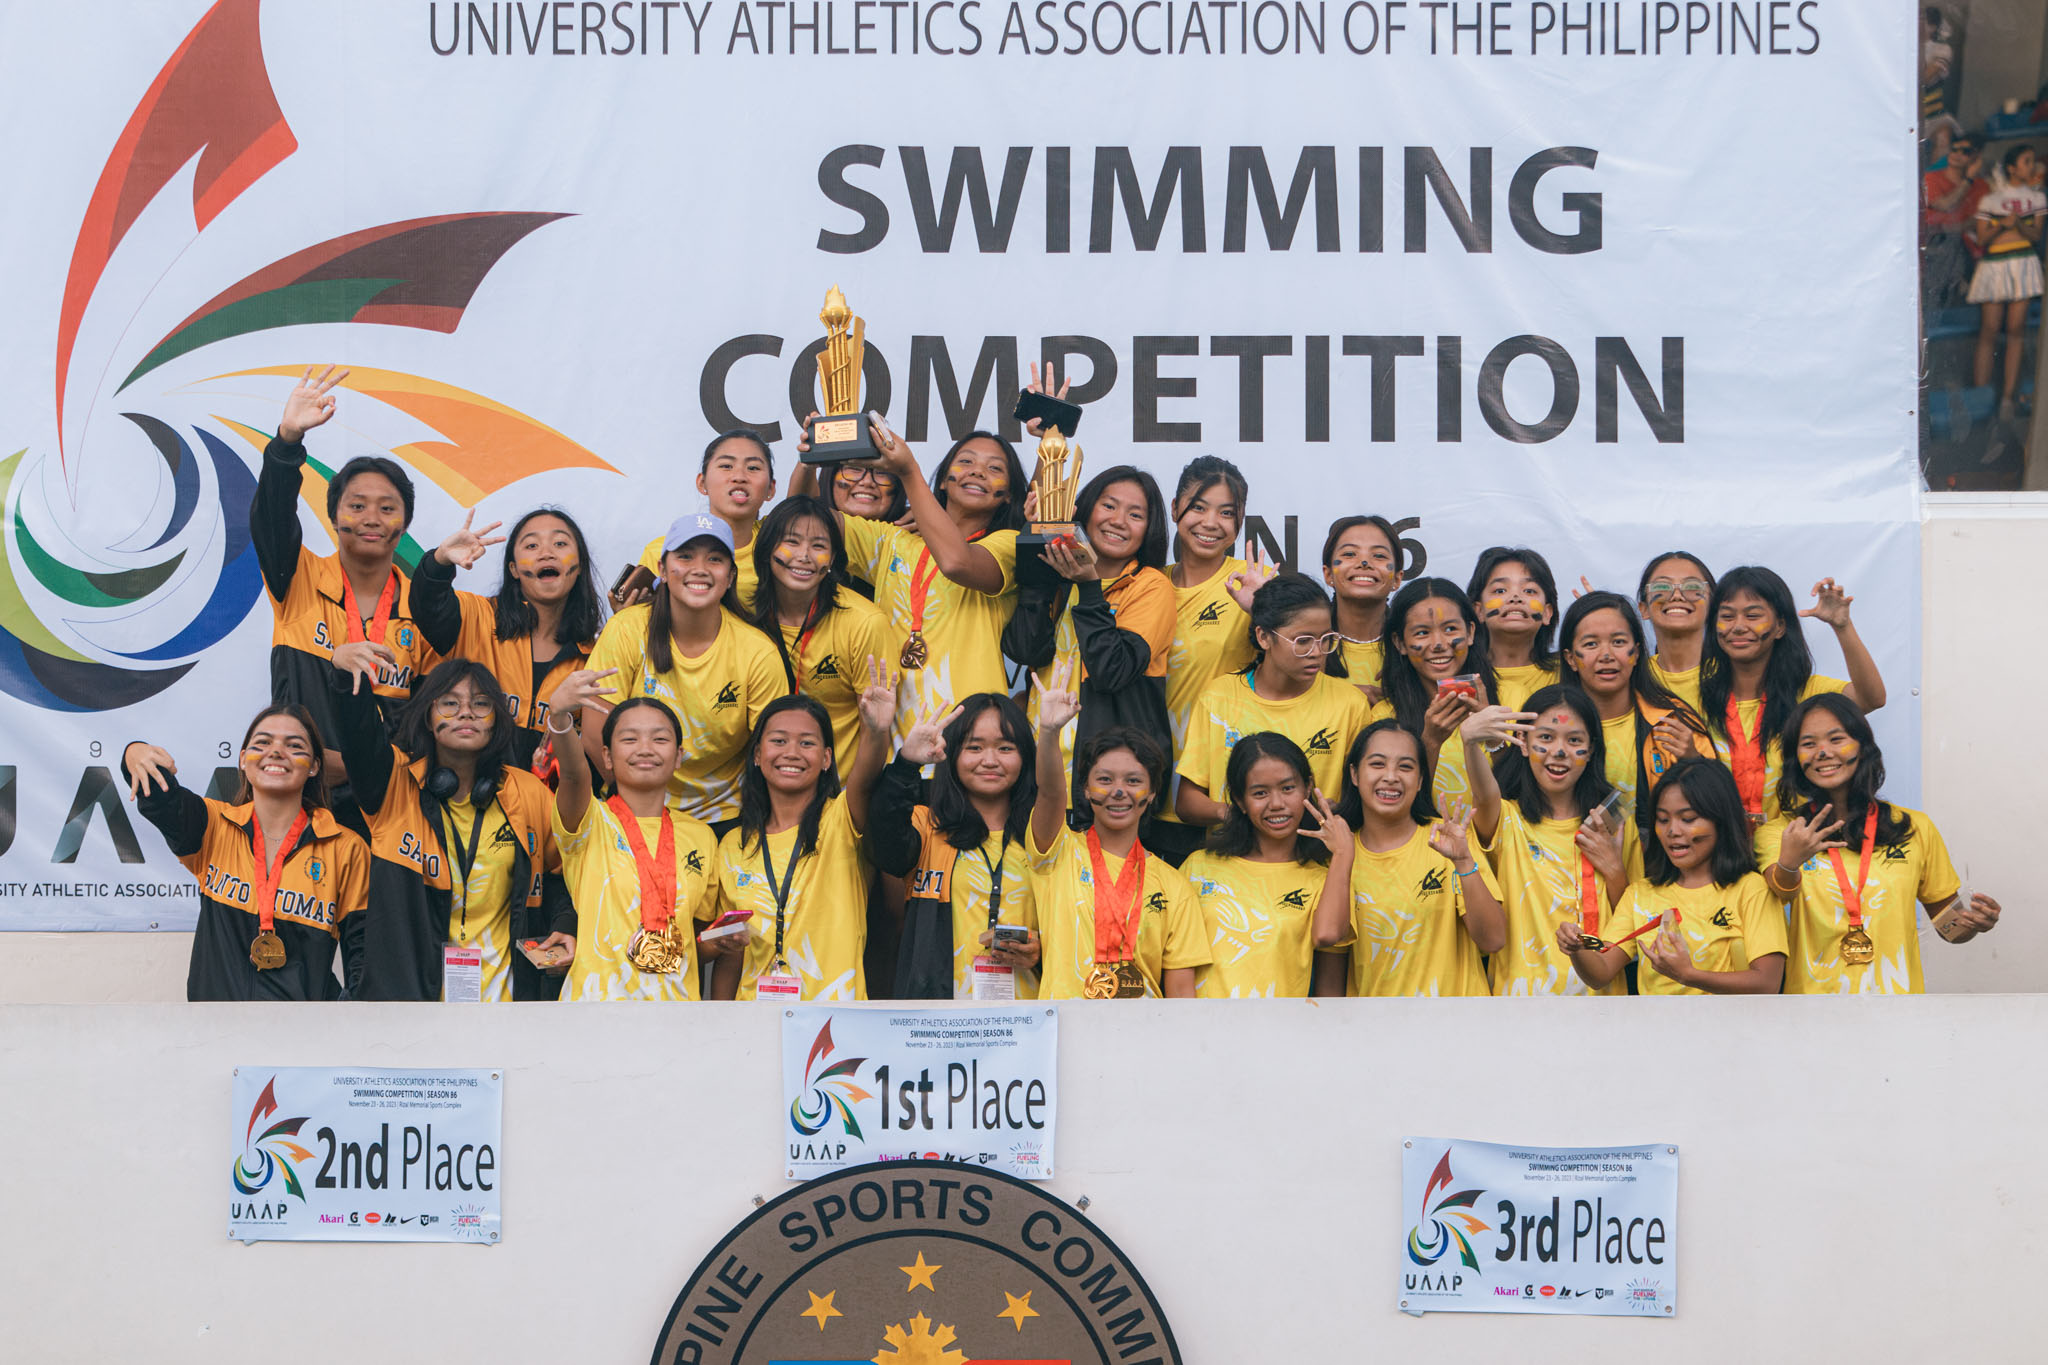 UAAP86-SWIMMING-GIRLS-GOLD-USTIMG_0869-Enhanced-NR UST High scores 'golden double' treble in UAAP swimming ADMU DLSU News Swimming UAAP UP UST  - philippine sports news